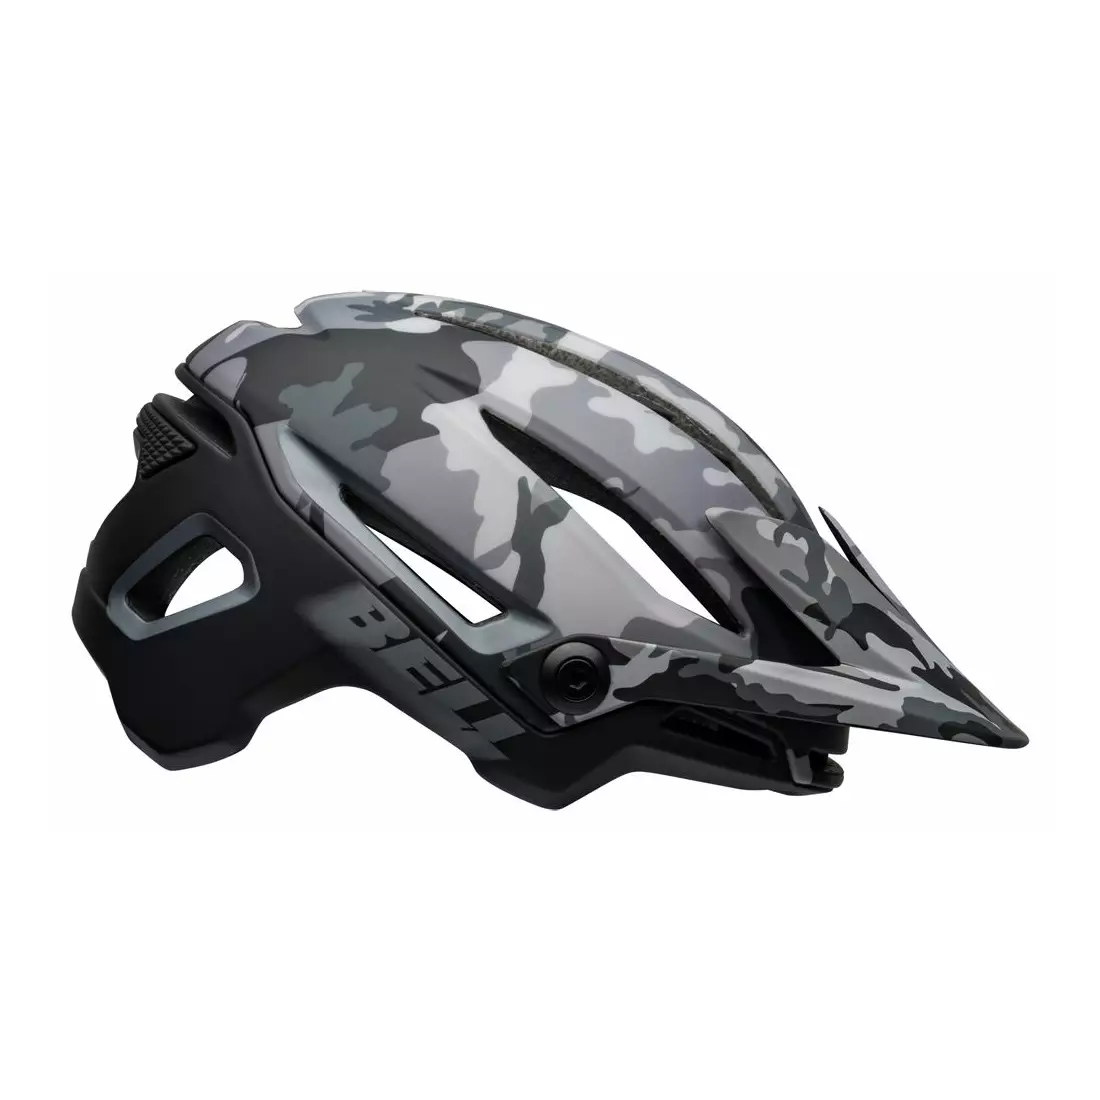 BELL kask rowerowy mtb SIXER INTEGRATED MIPS, matte gloss black camo 